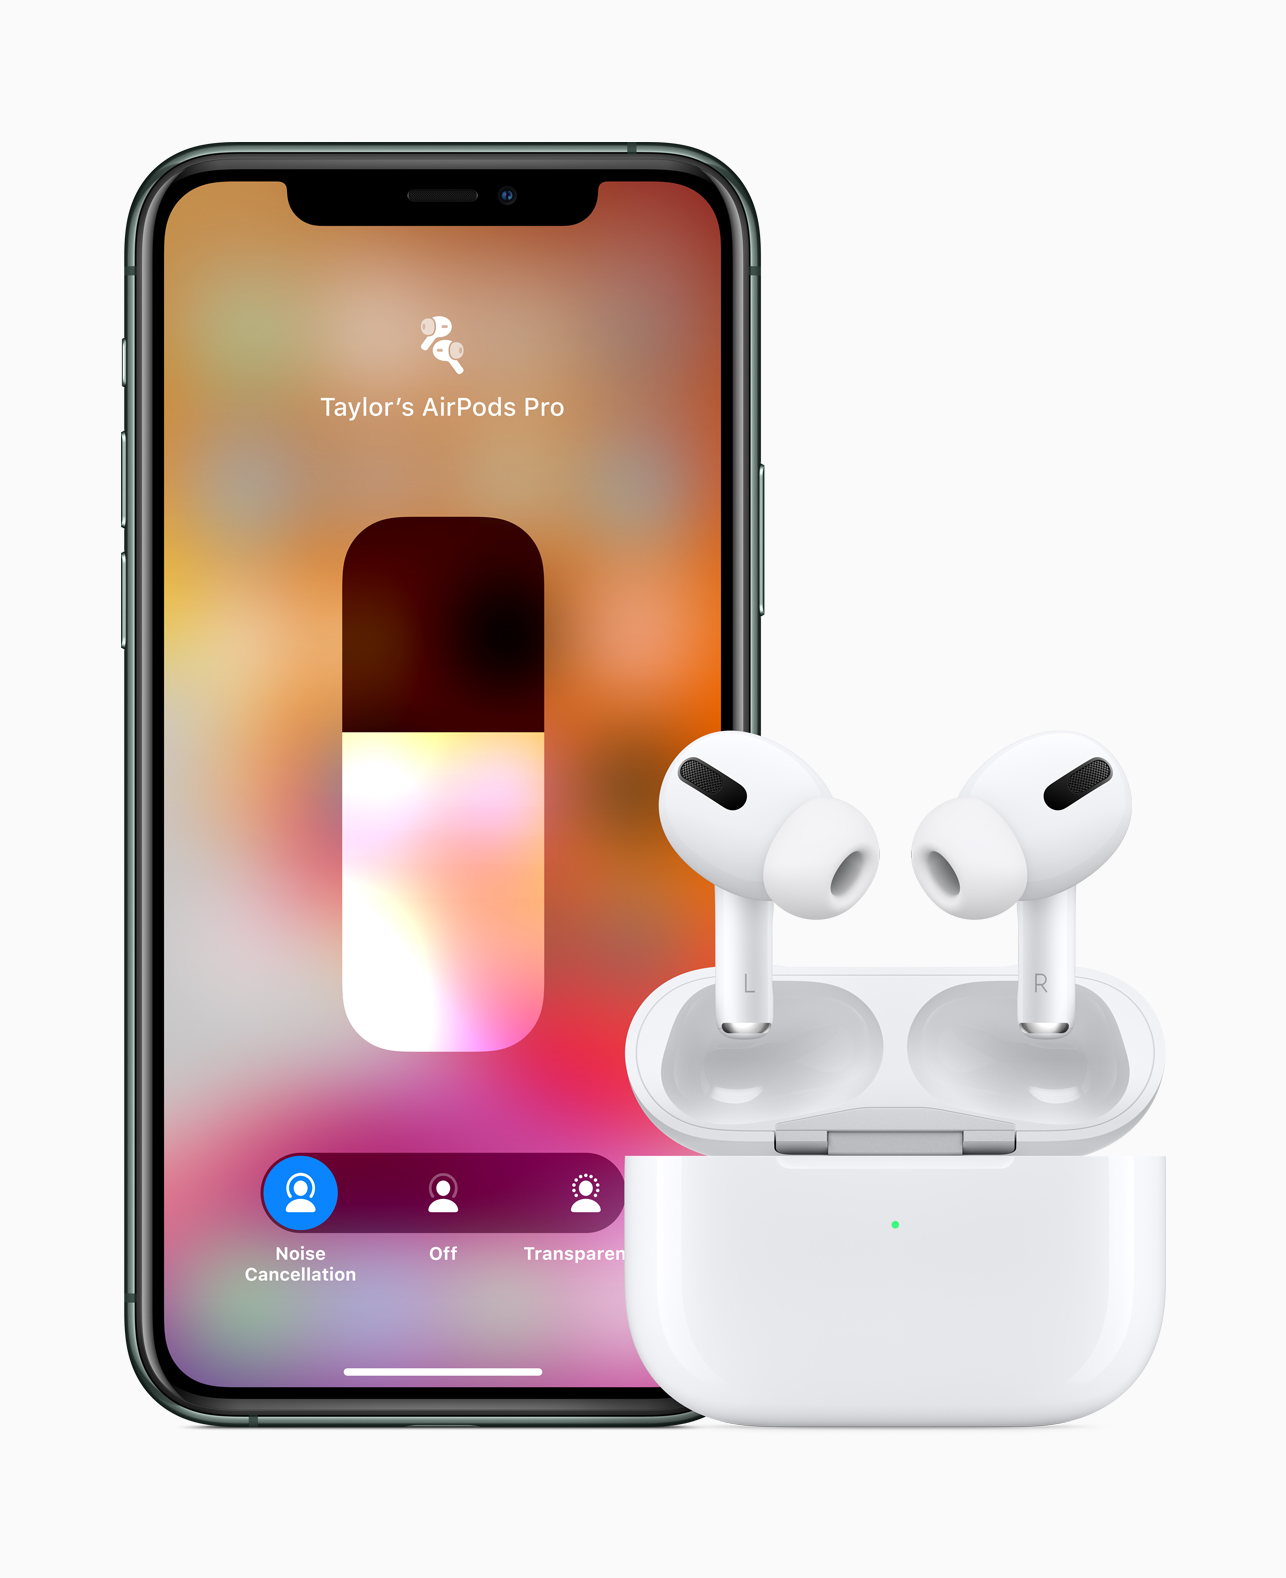 Black Friday 2019 Apple Deals on Apple Watches, Airpods, iPhones and More